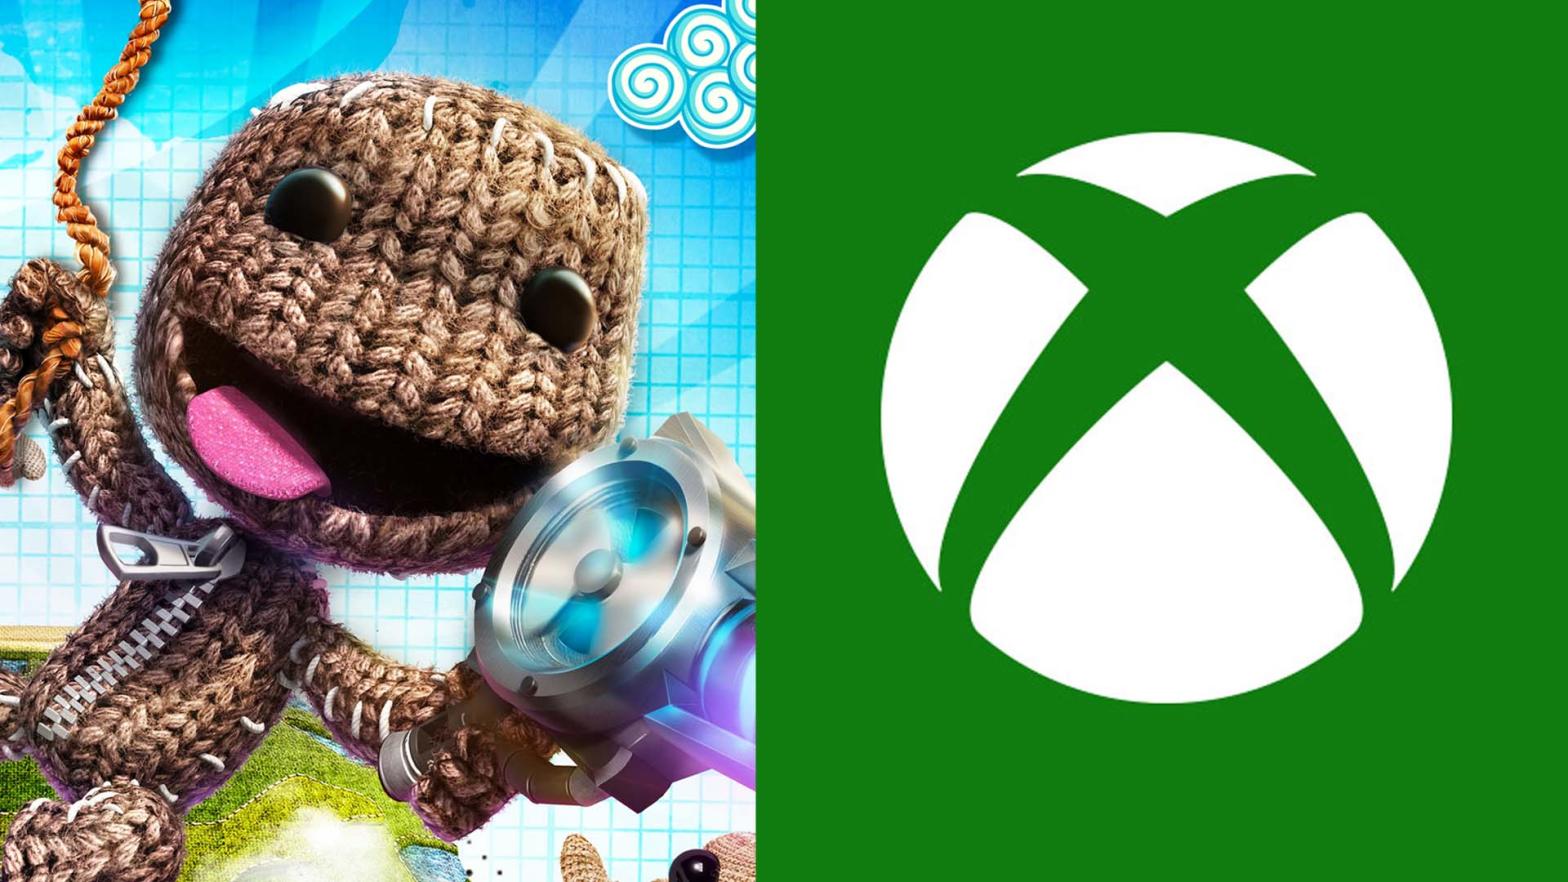 Microsoft Reportedly Tried To ‘Steal’ Little Big Planet From Sony